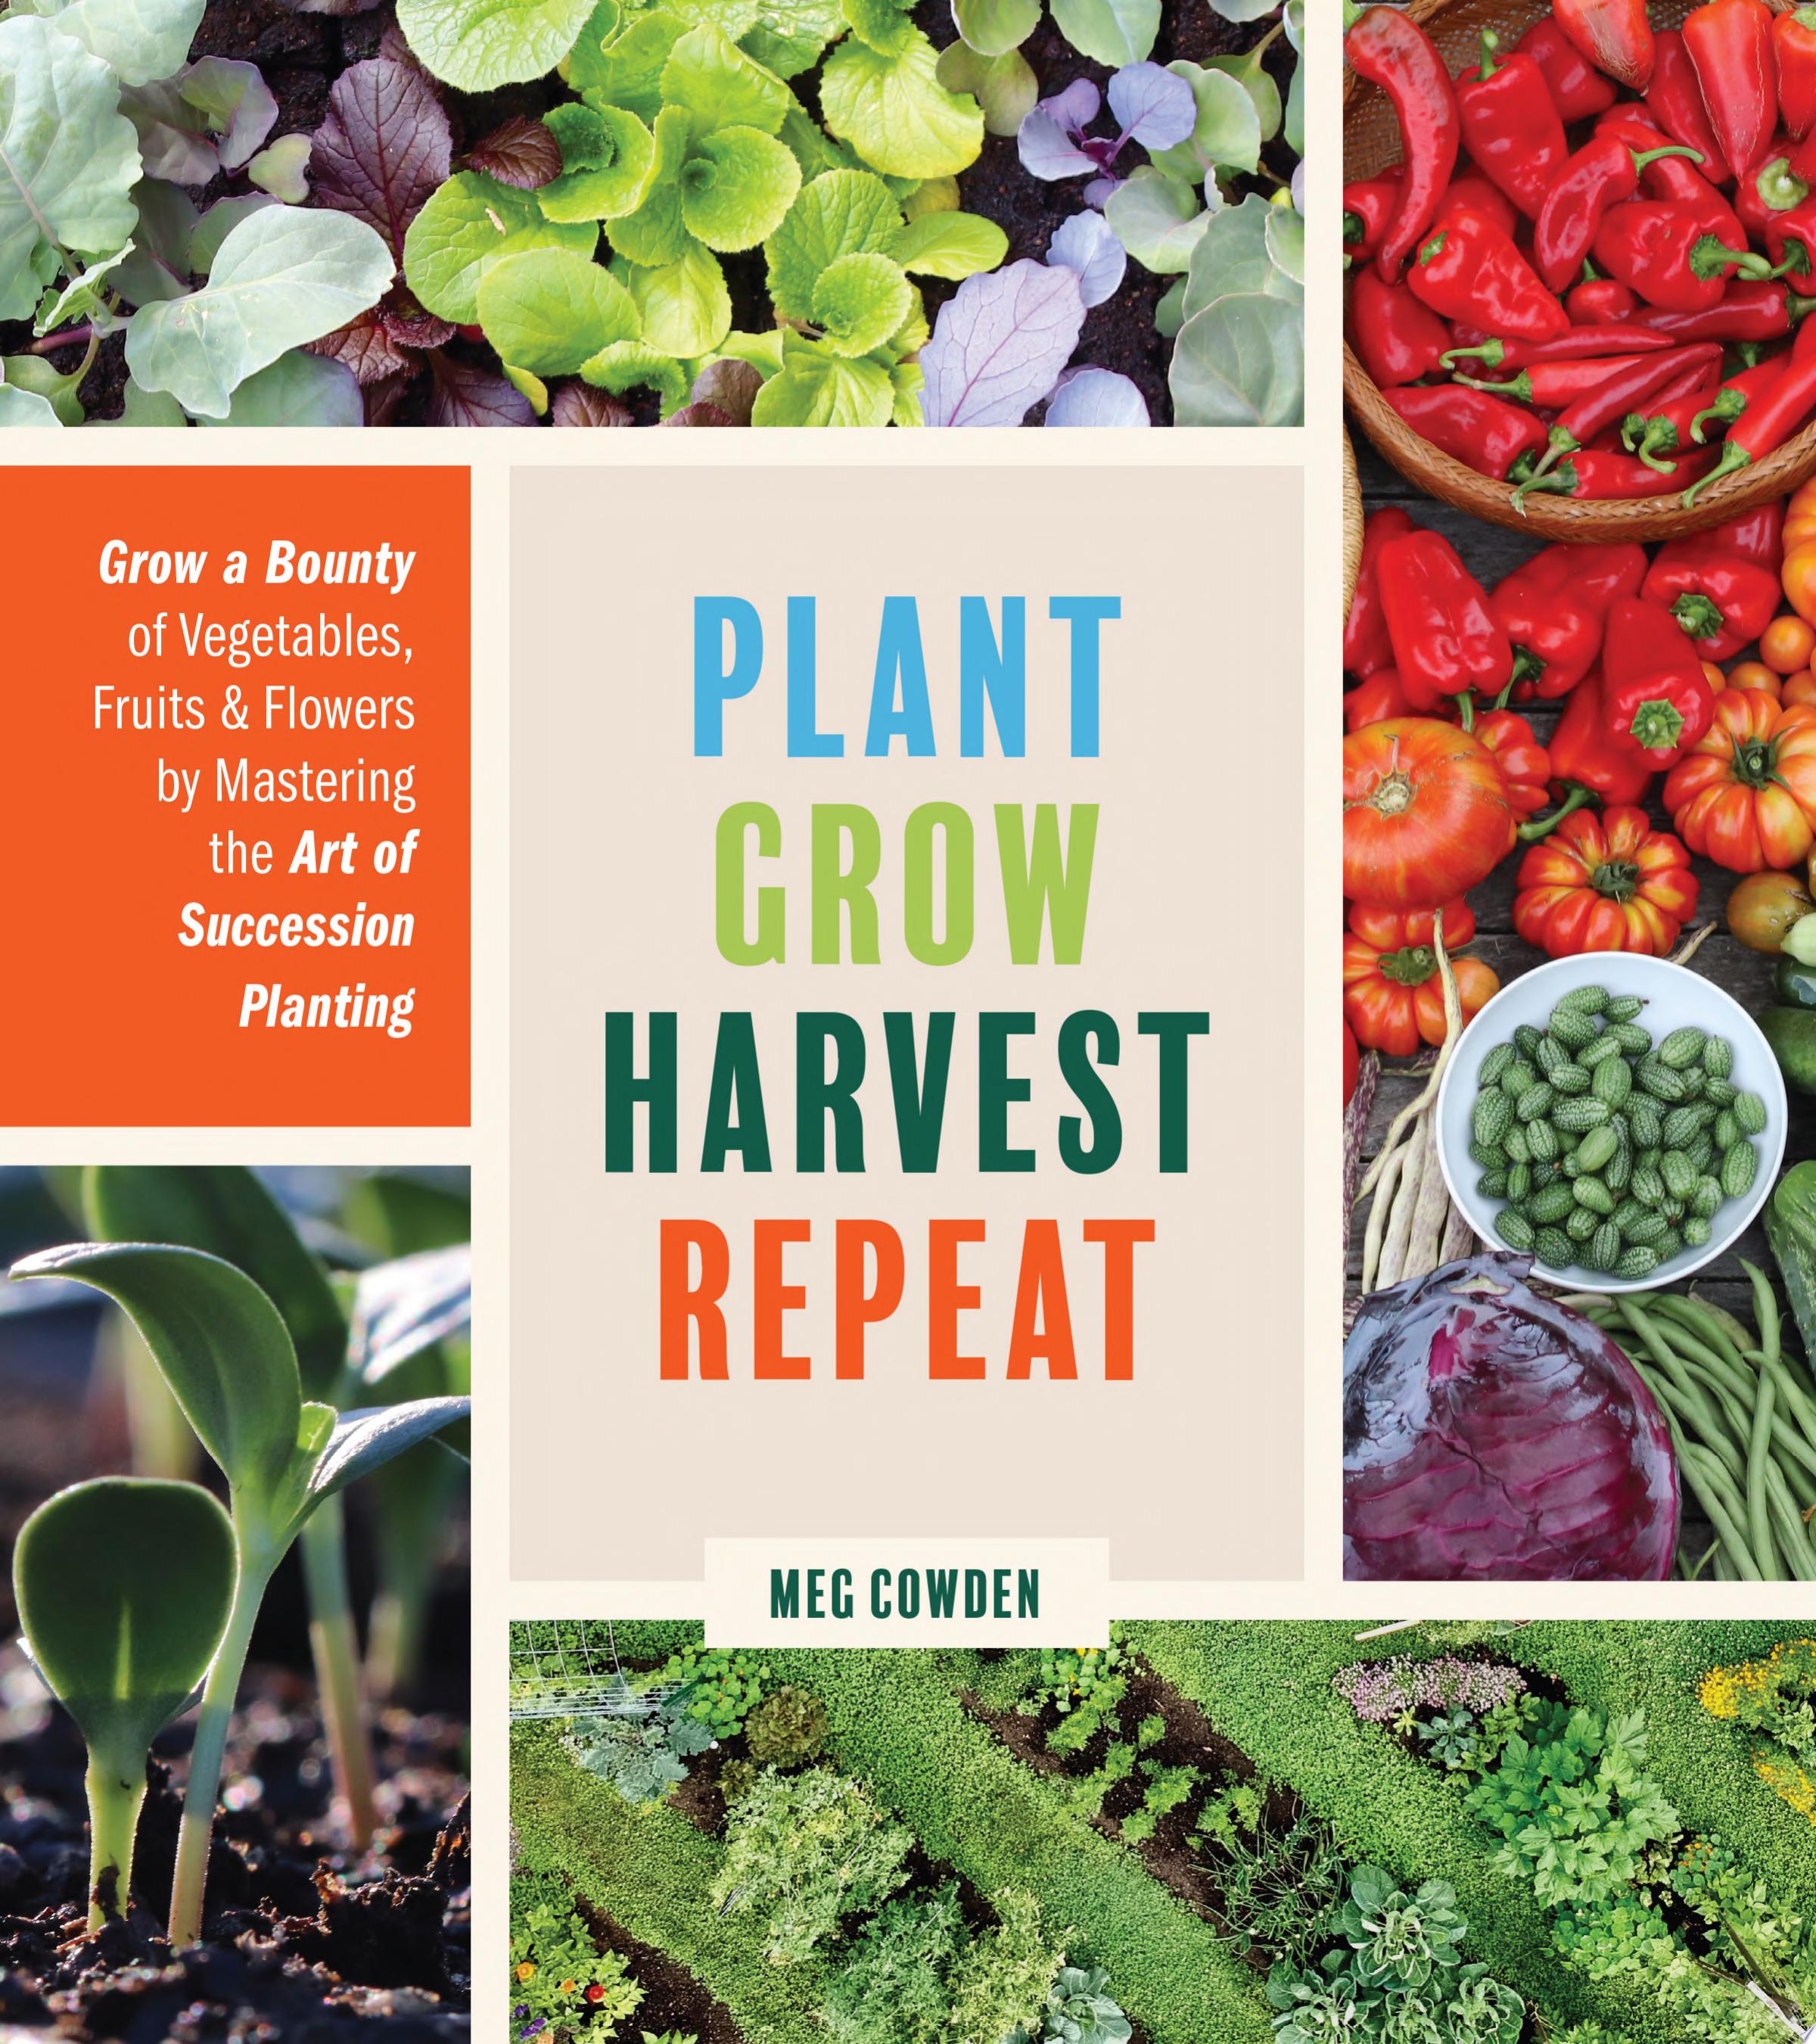 Image for "Plant Grow Harvest Repeat"